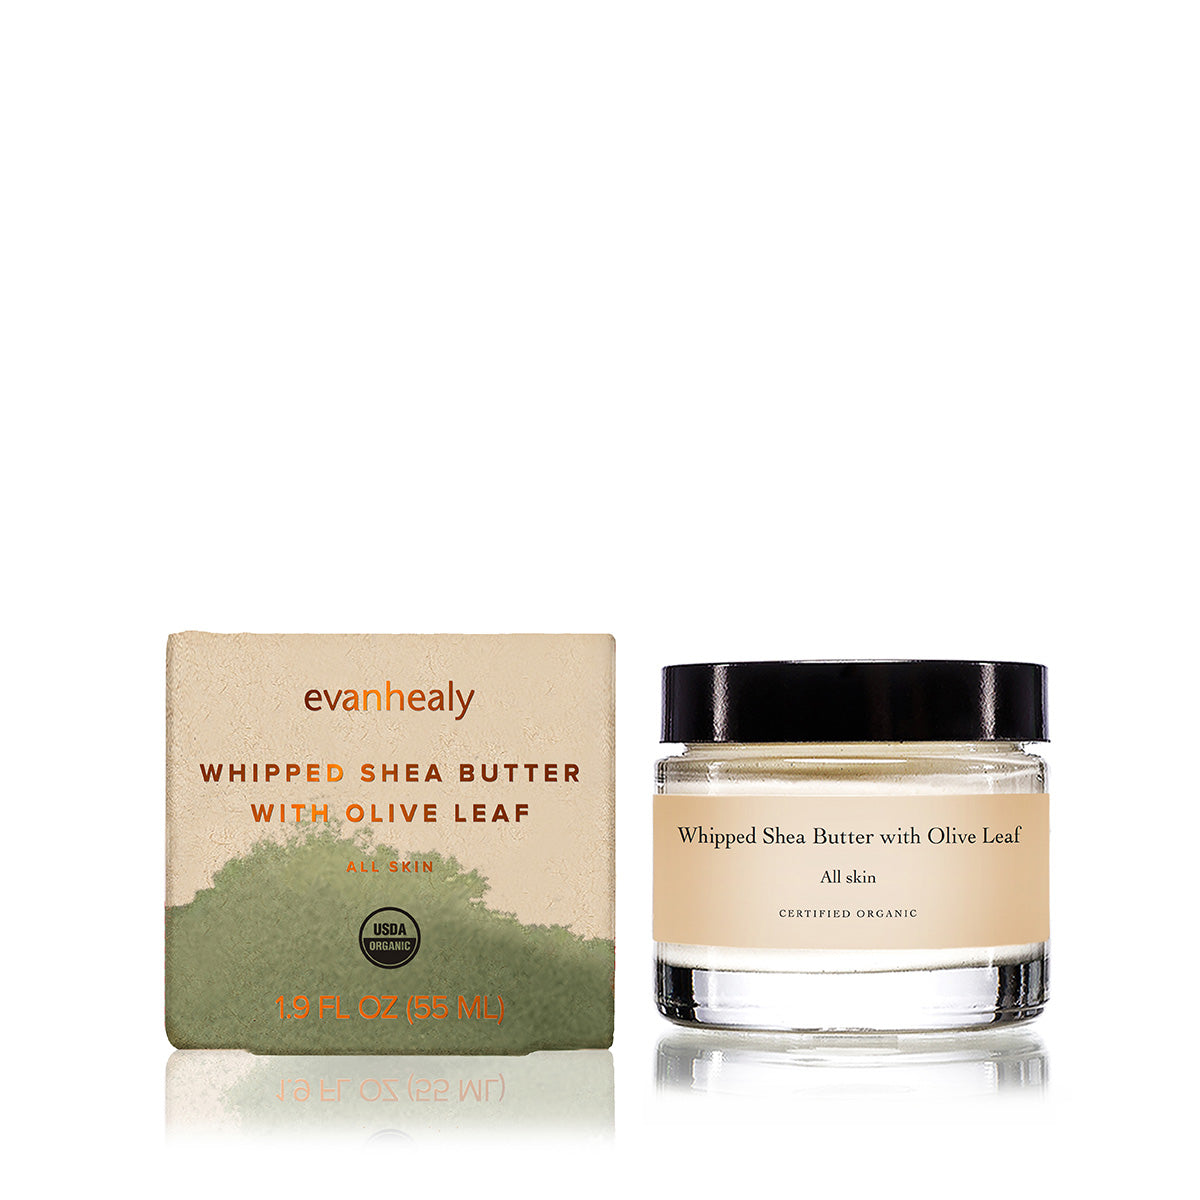 evanhealy whipped shea butter with olive leaf facial moisturizer for face with box